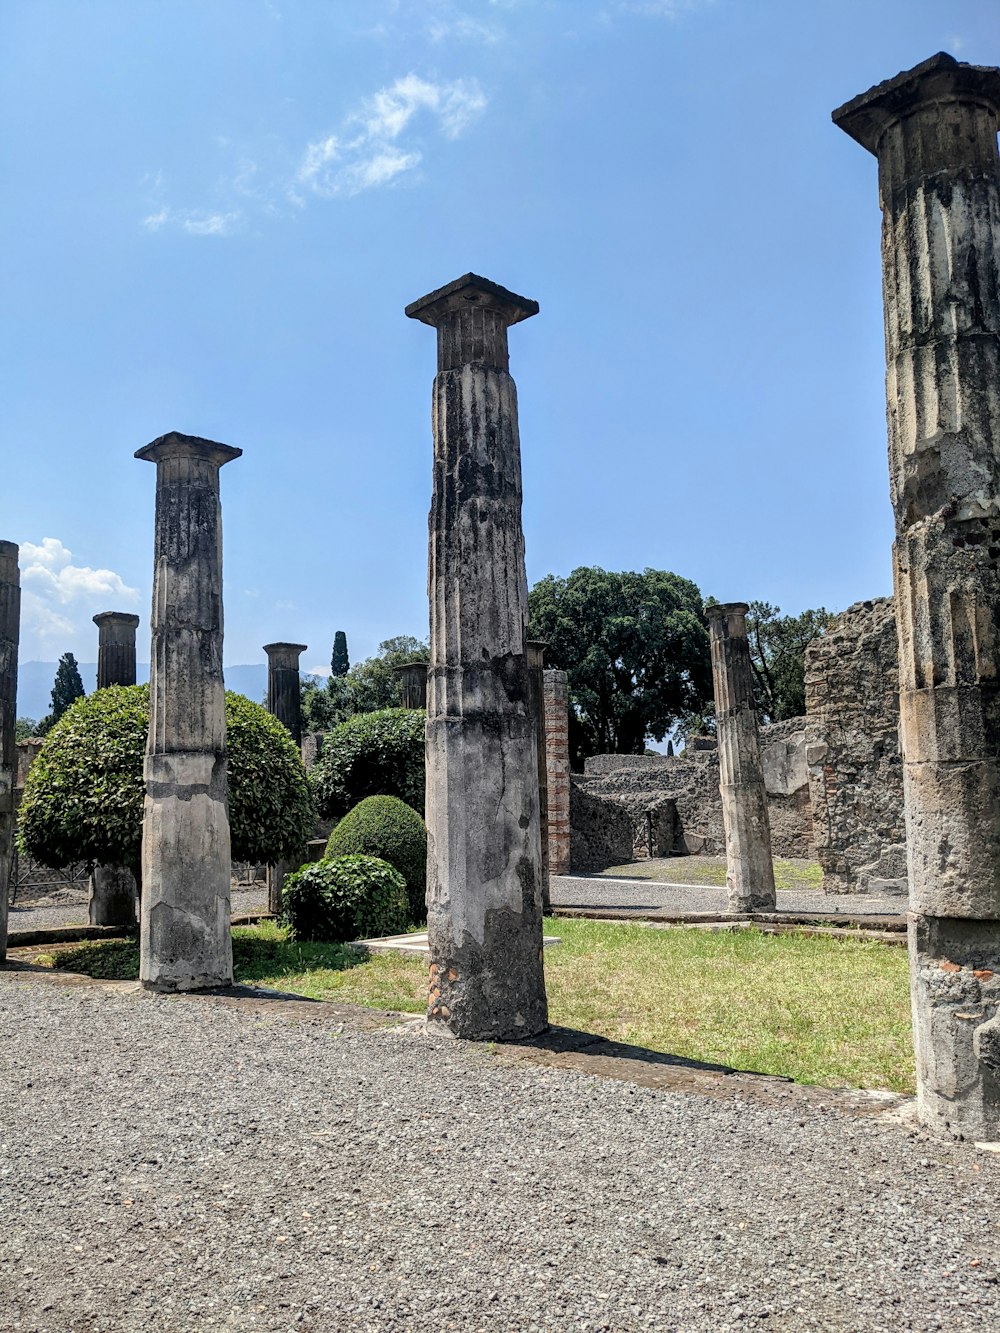 a group of stone pillars sitting next to each other